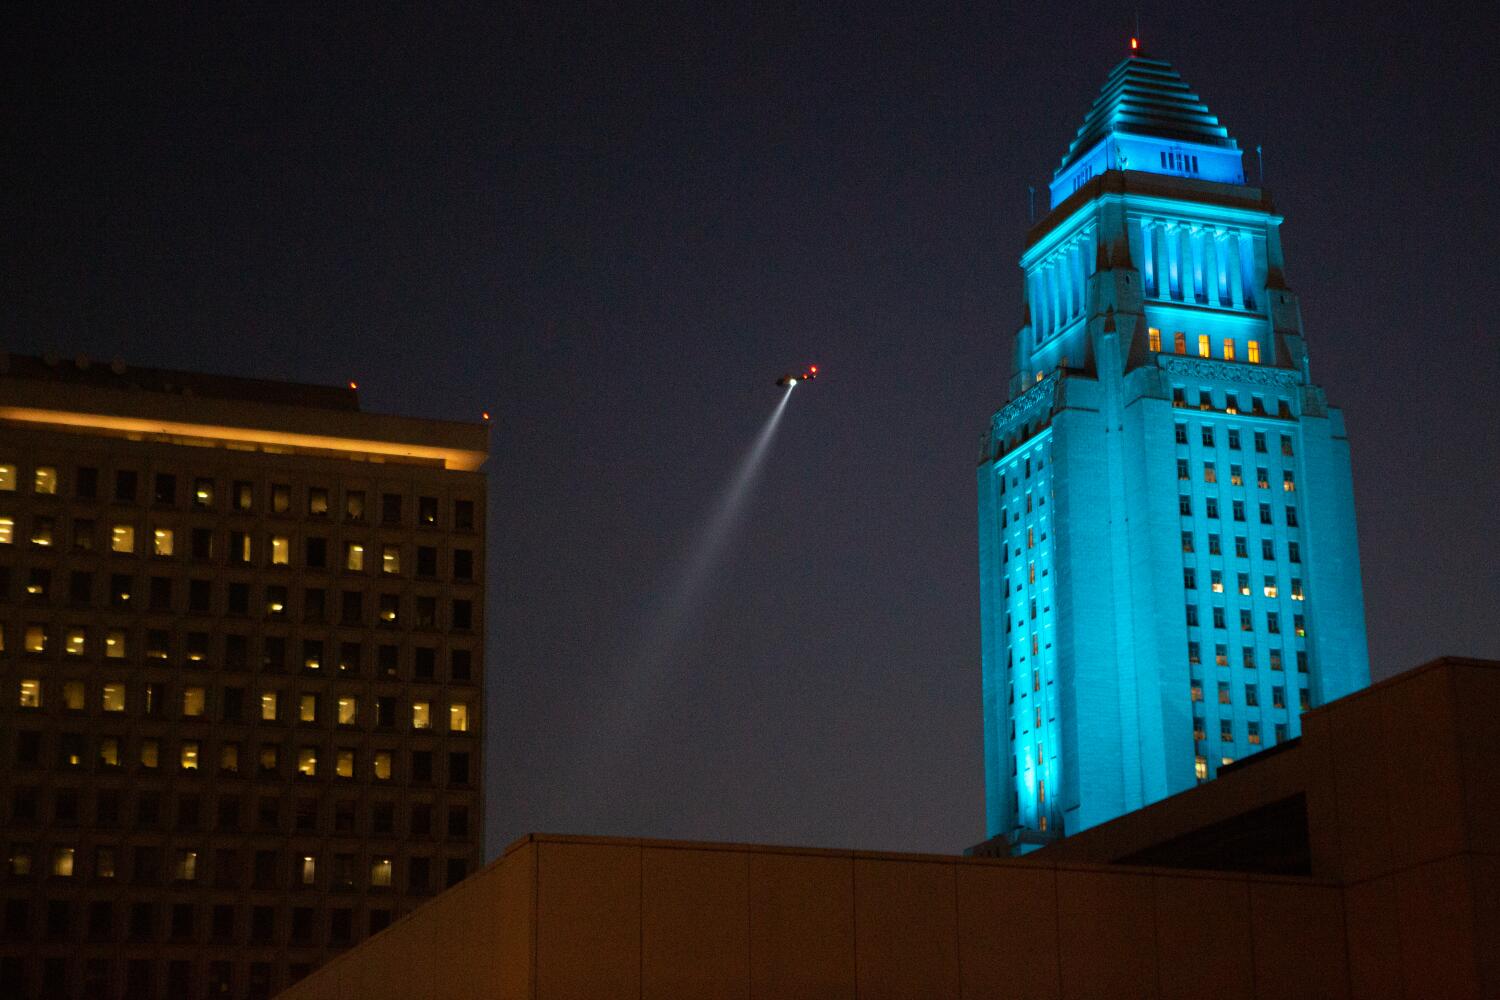 LAPD slams ‘highly inaccurate’ audit that questioned millions spent on helicopters